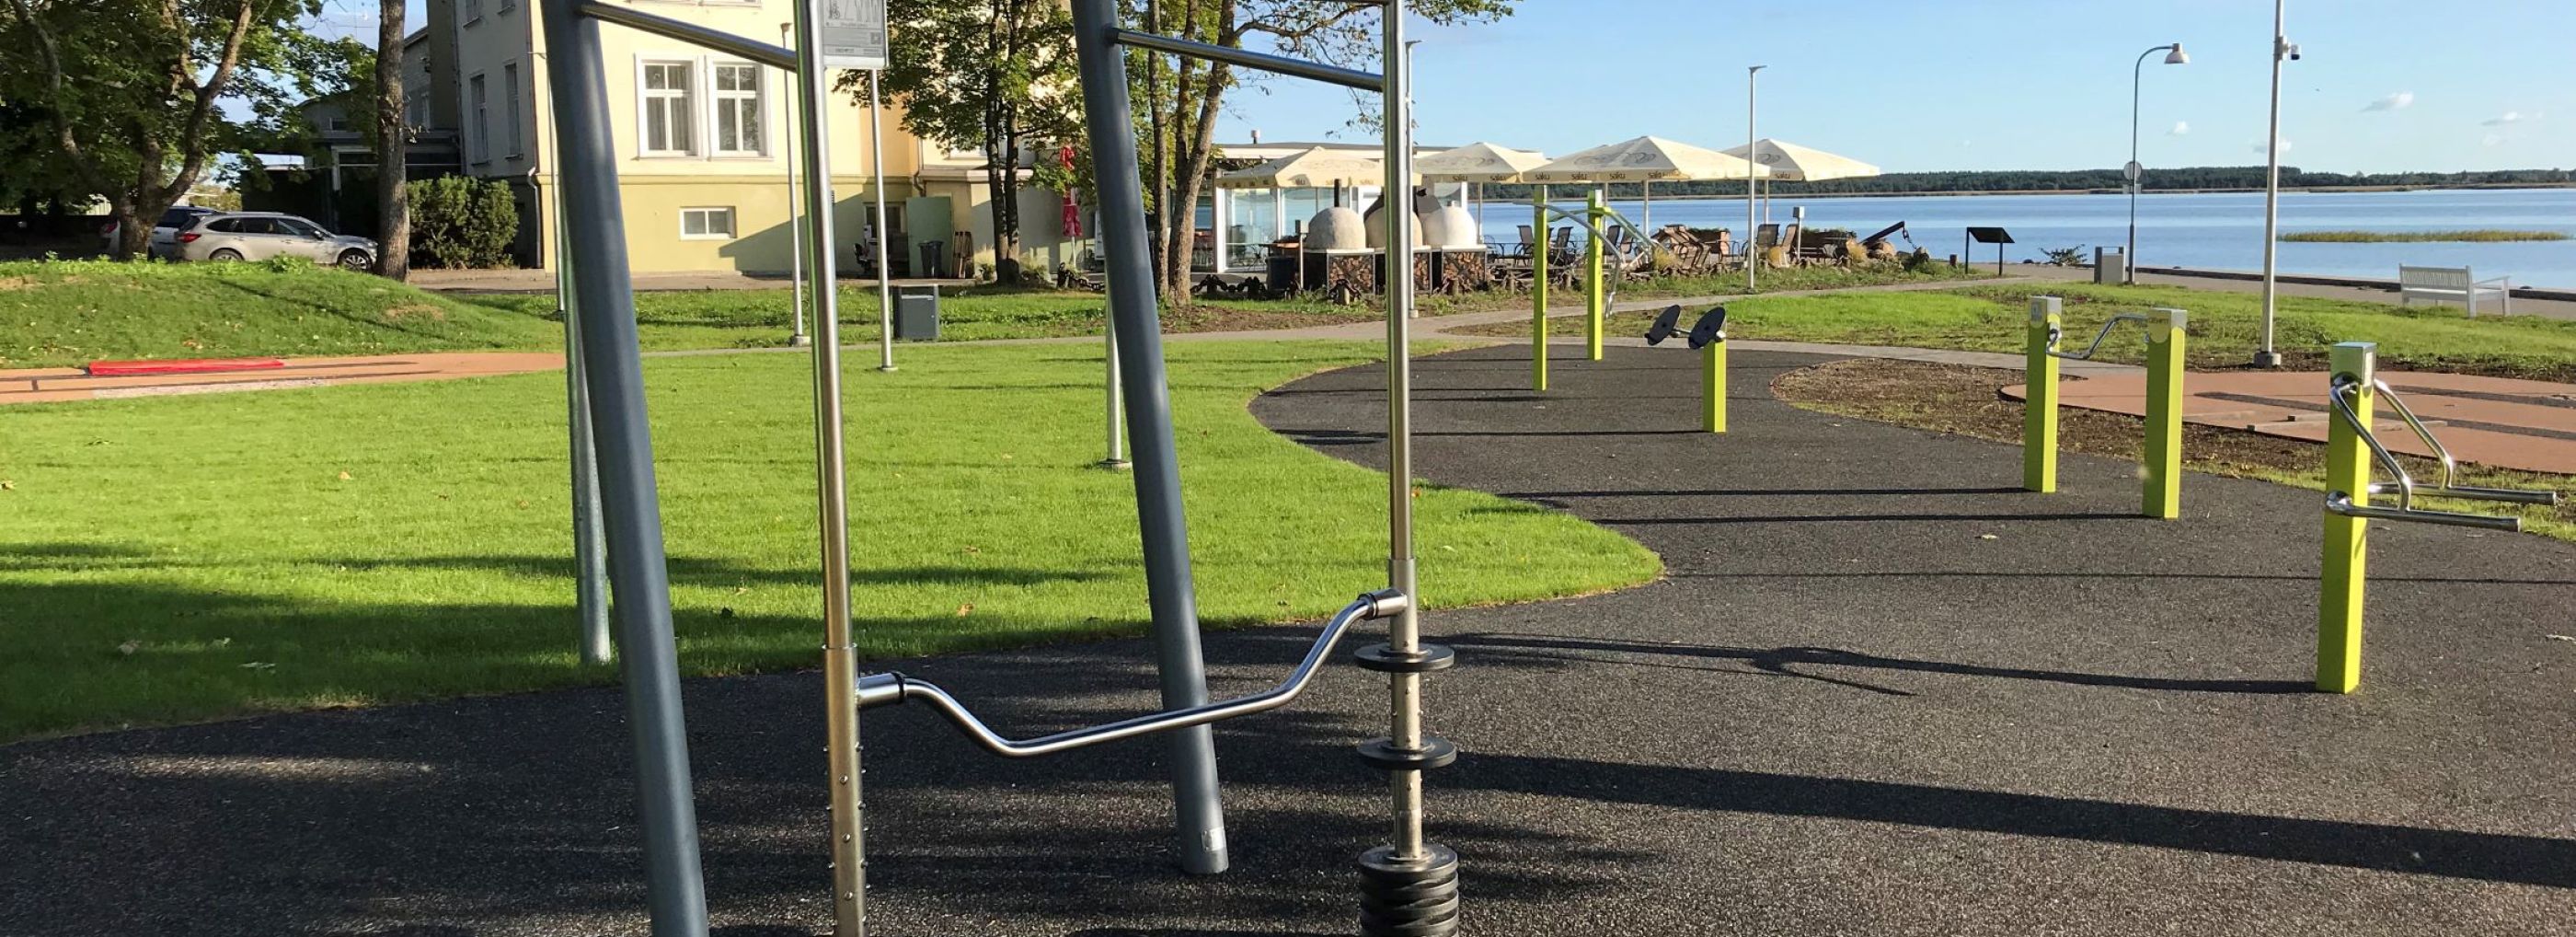 Rubber flooring at an outdoor gym.